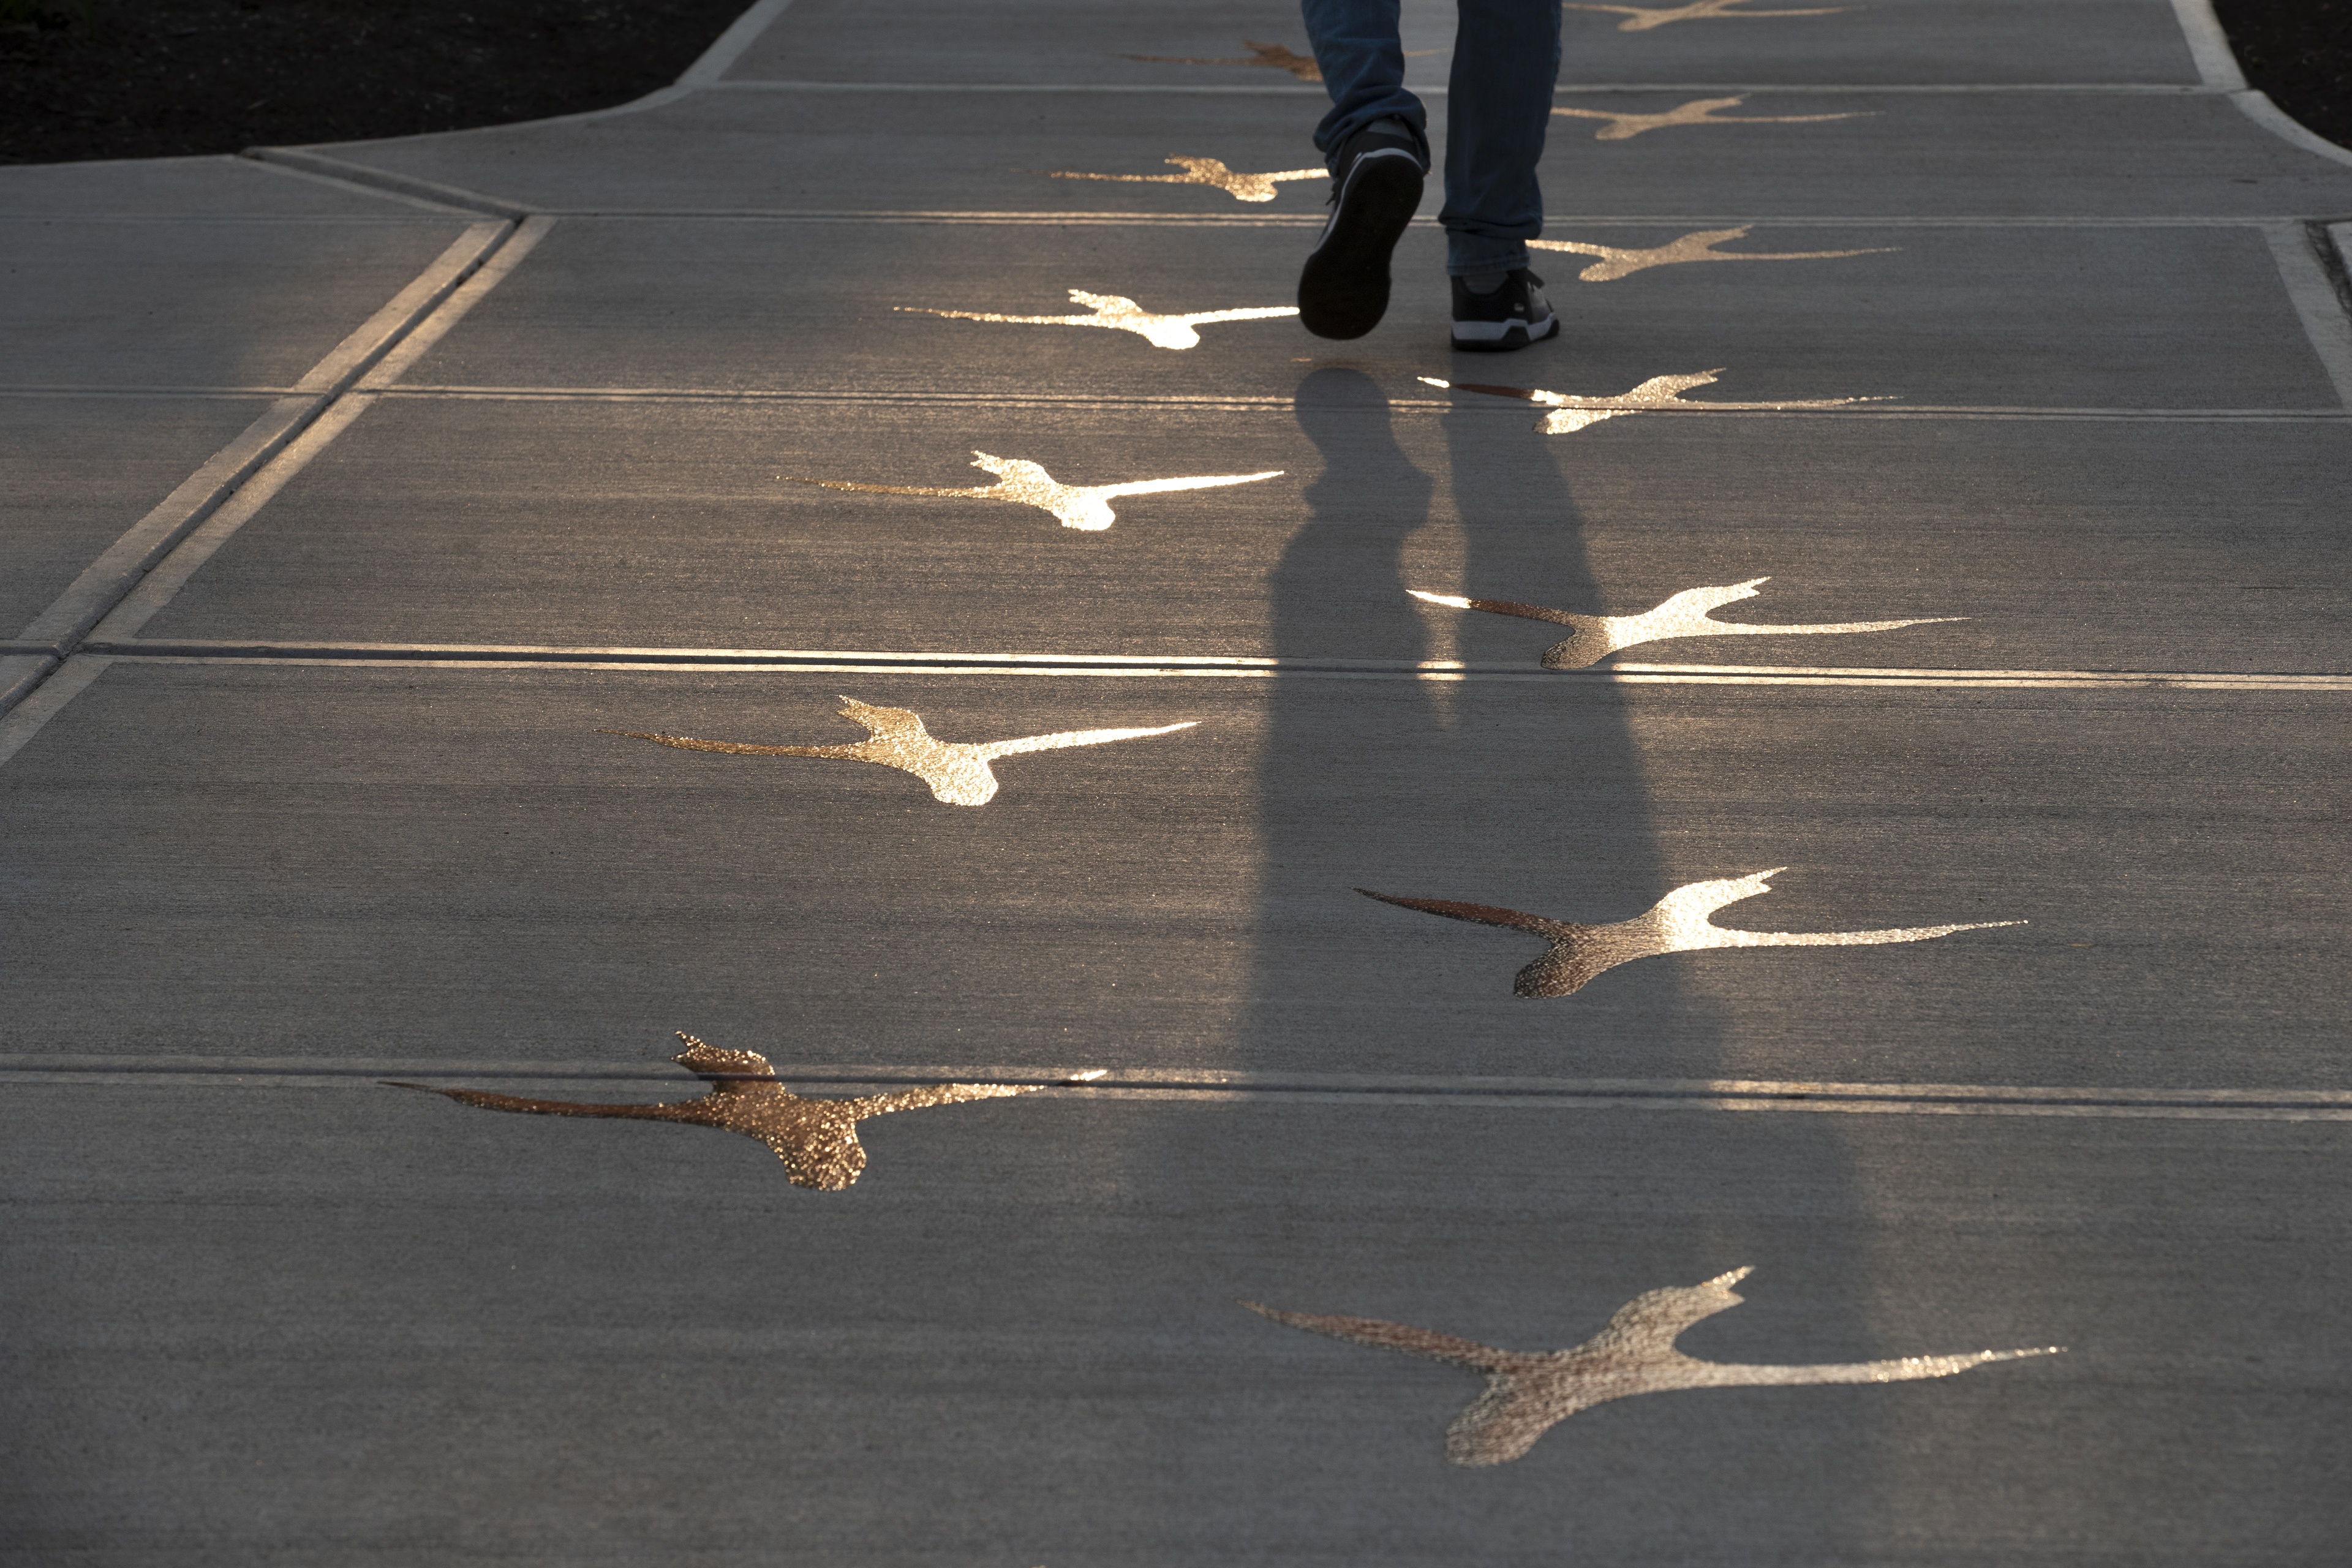 Sidewalk shows large decals in shape of falcon footprints